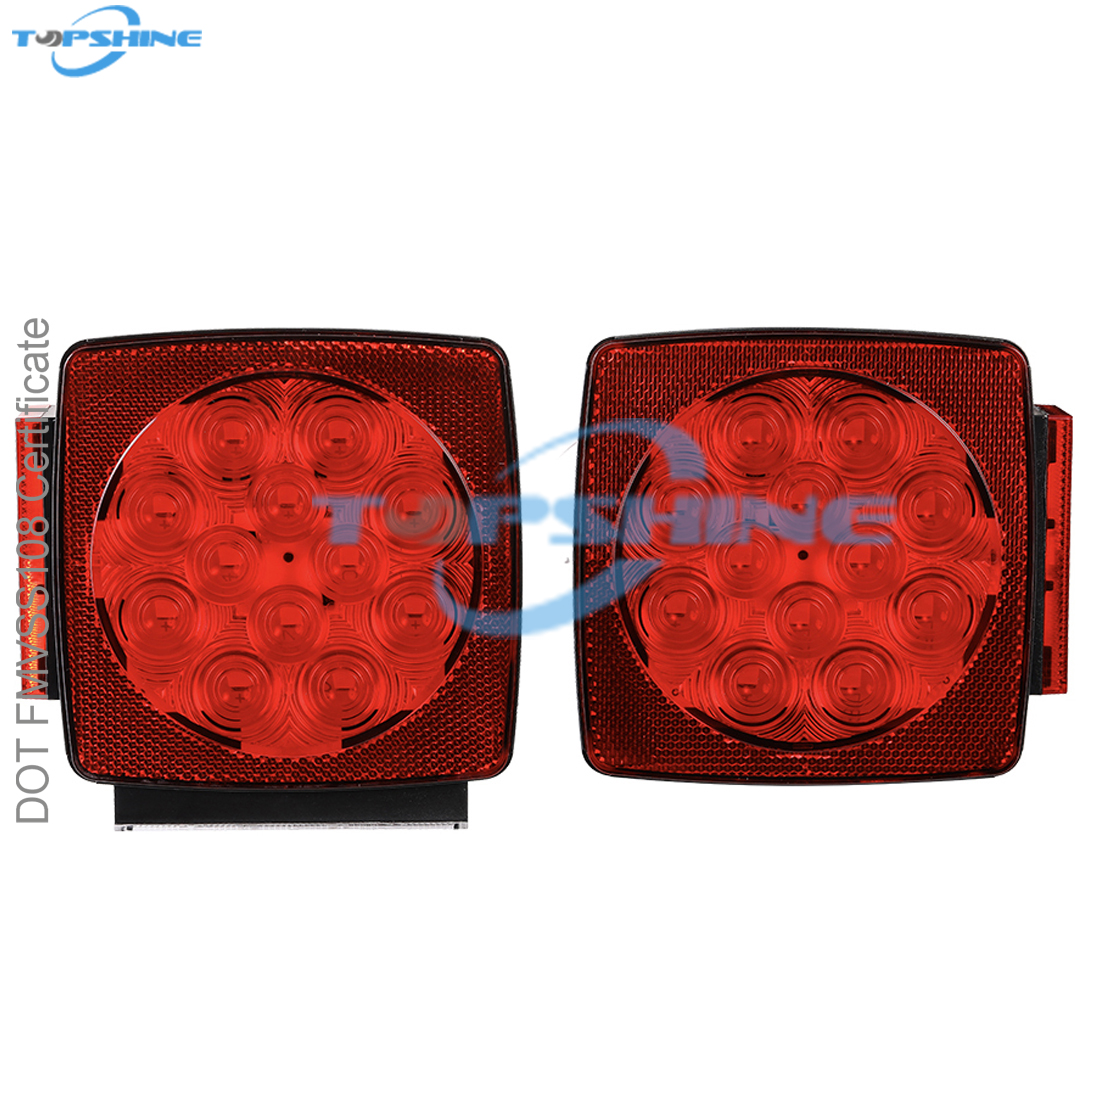 101001W Waterproof Led Trailer Tail Light Kit For Truck Boat RV Featured Image